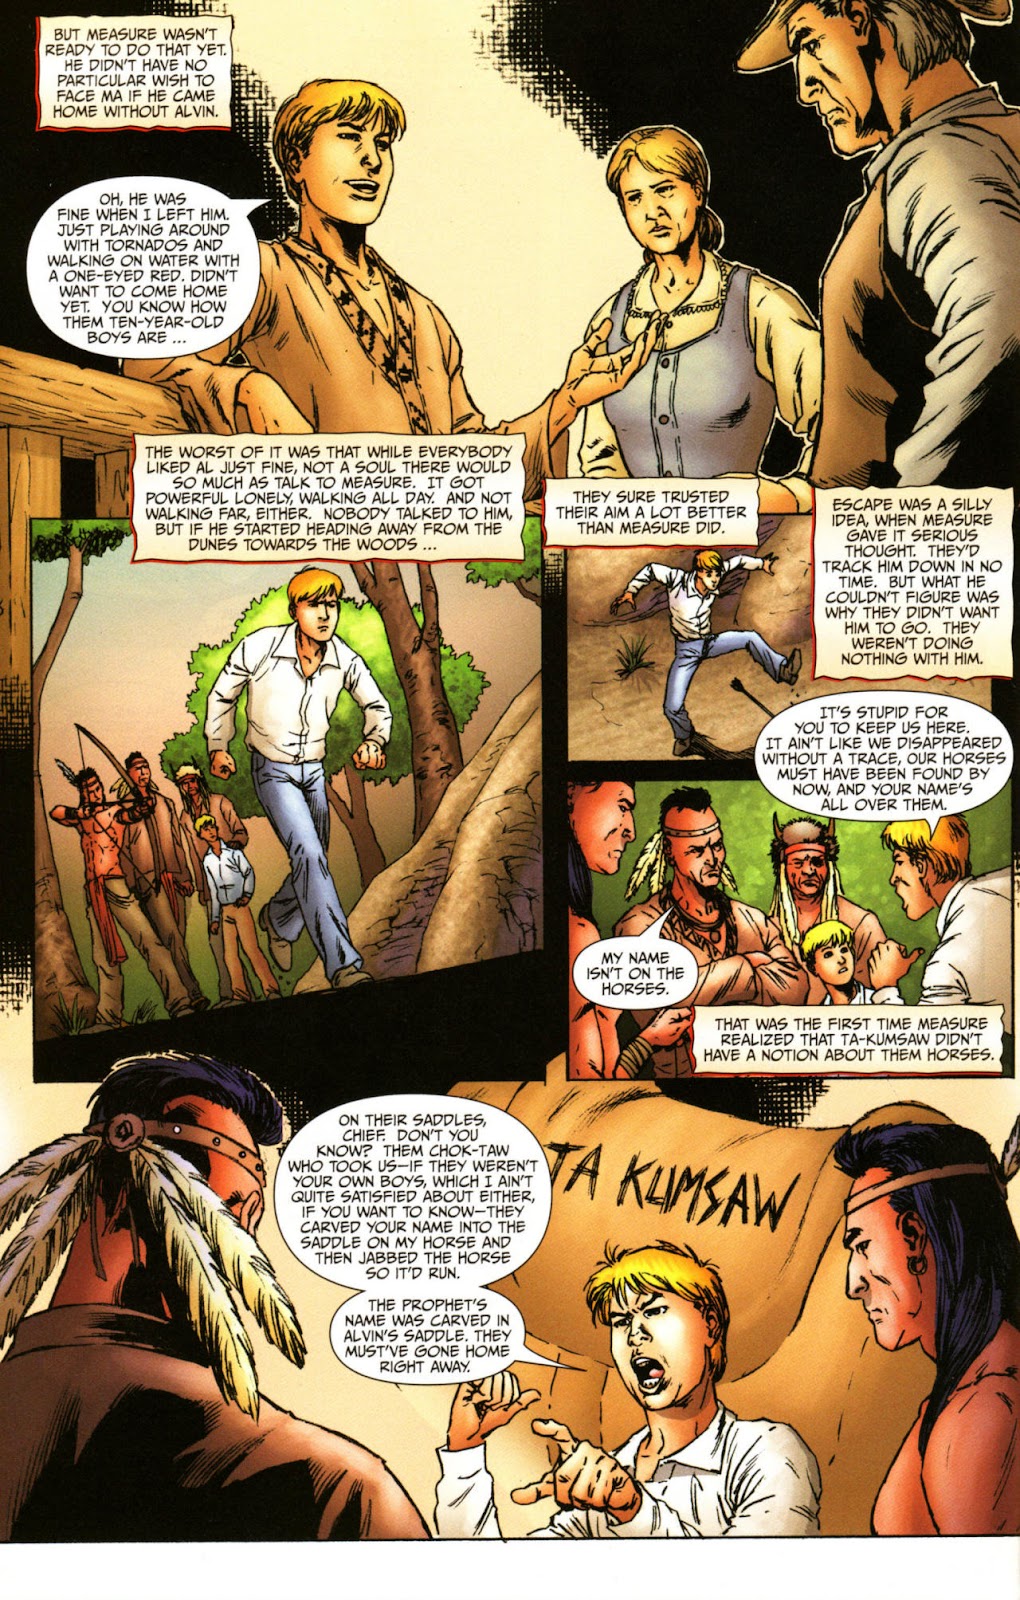 Red Prophet: The Tales of Alvin Maker issue 7 - Page 6